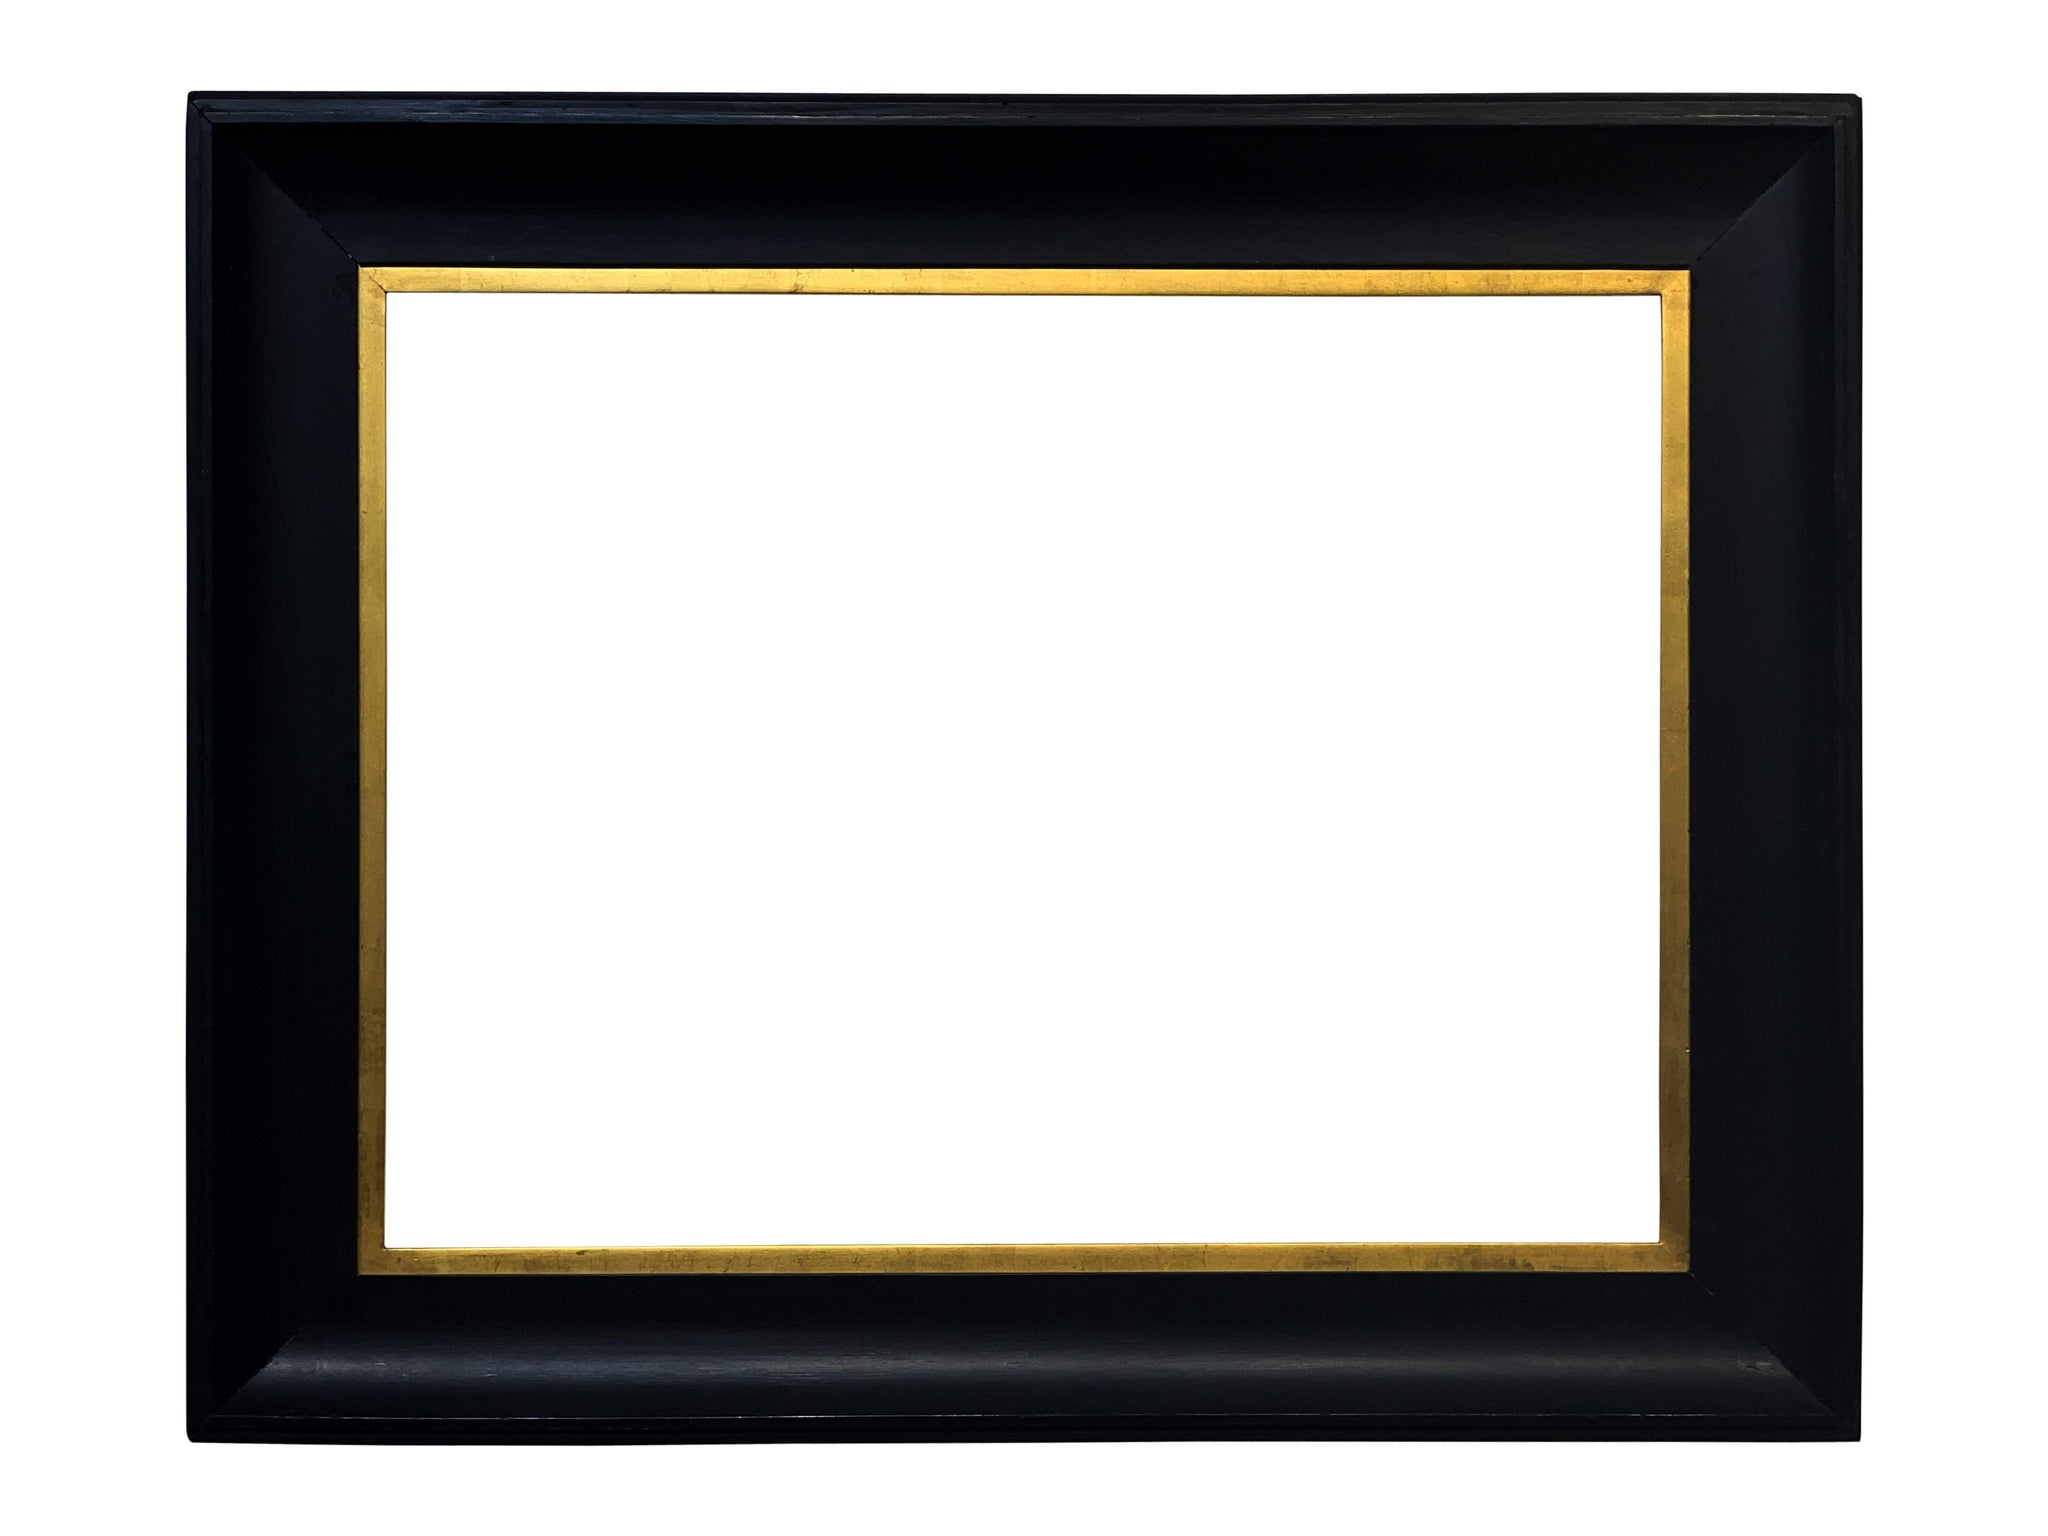 American 19x26 inch Black and Gold Picture Frame for canvas art circa 1900s (20th Century).